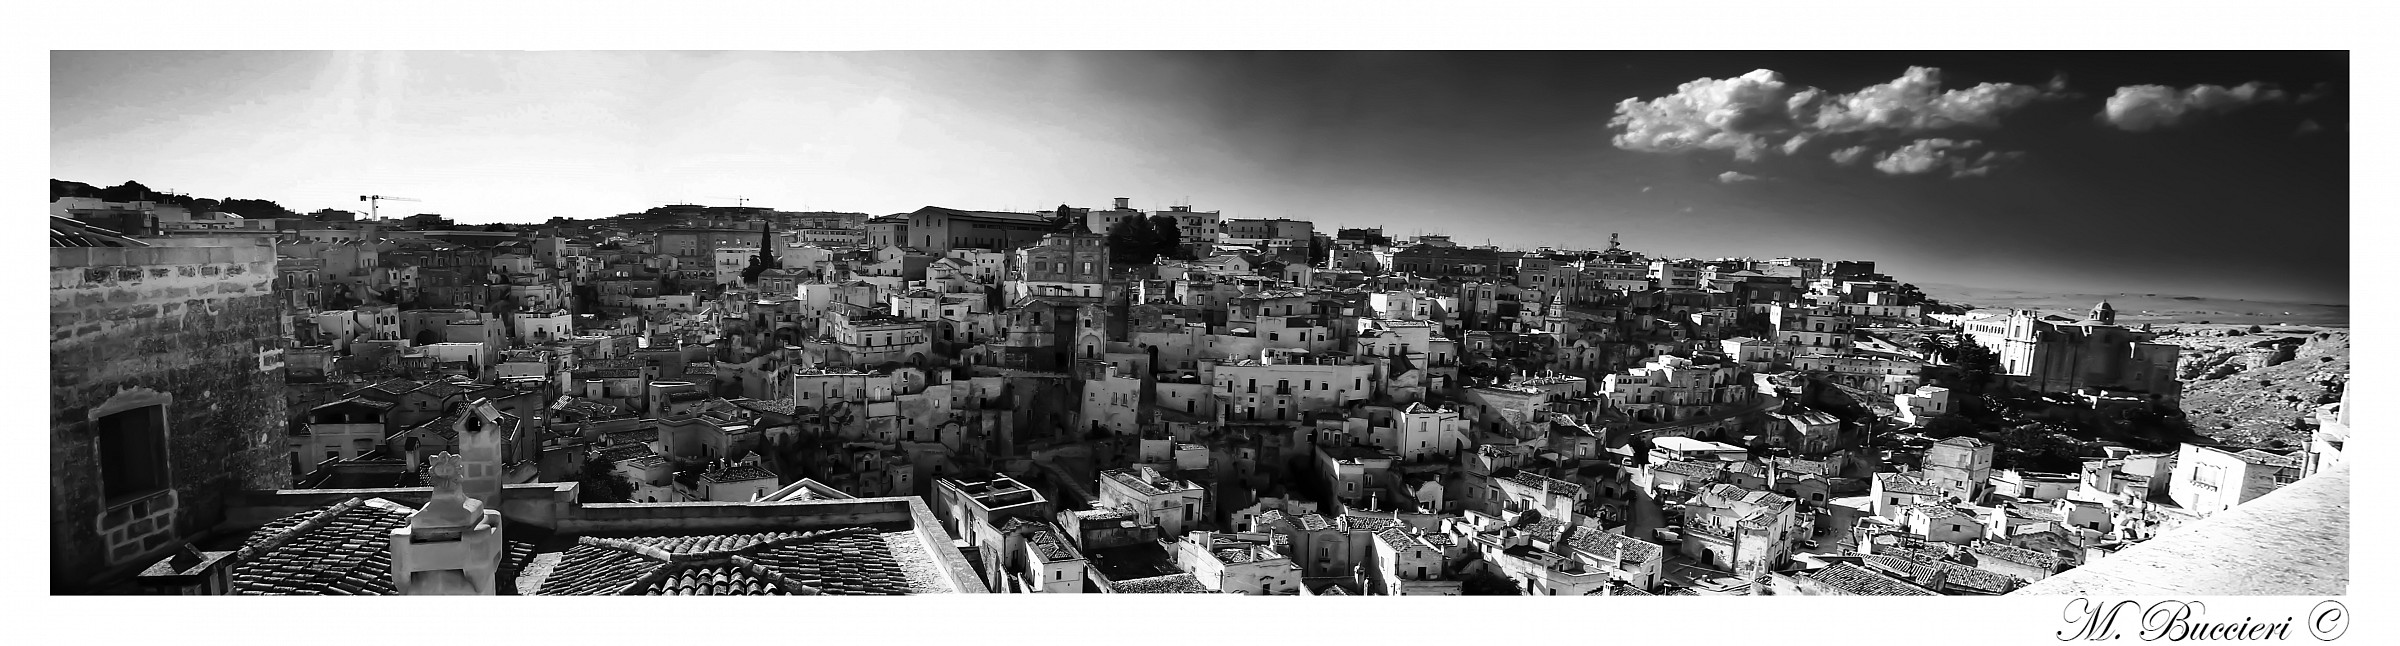 A view of the Sassi of Matera...